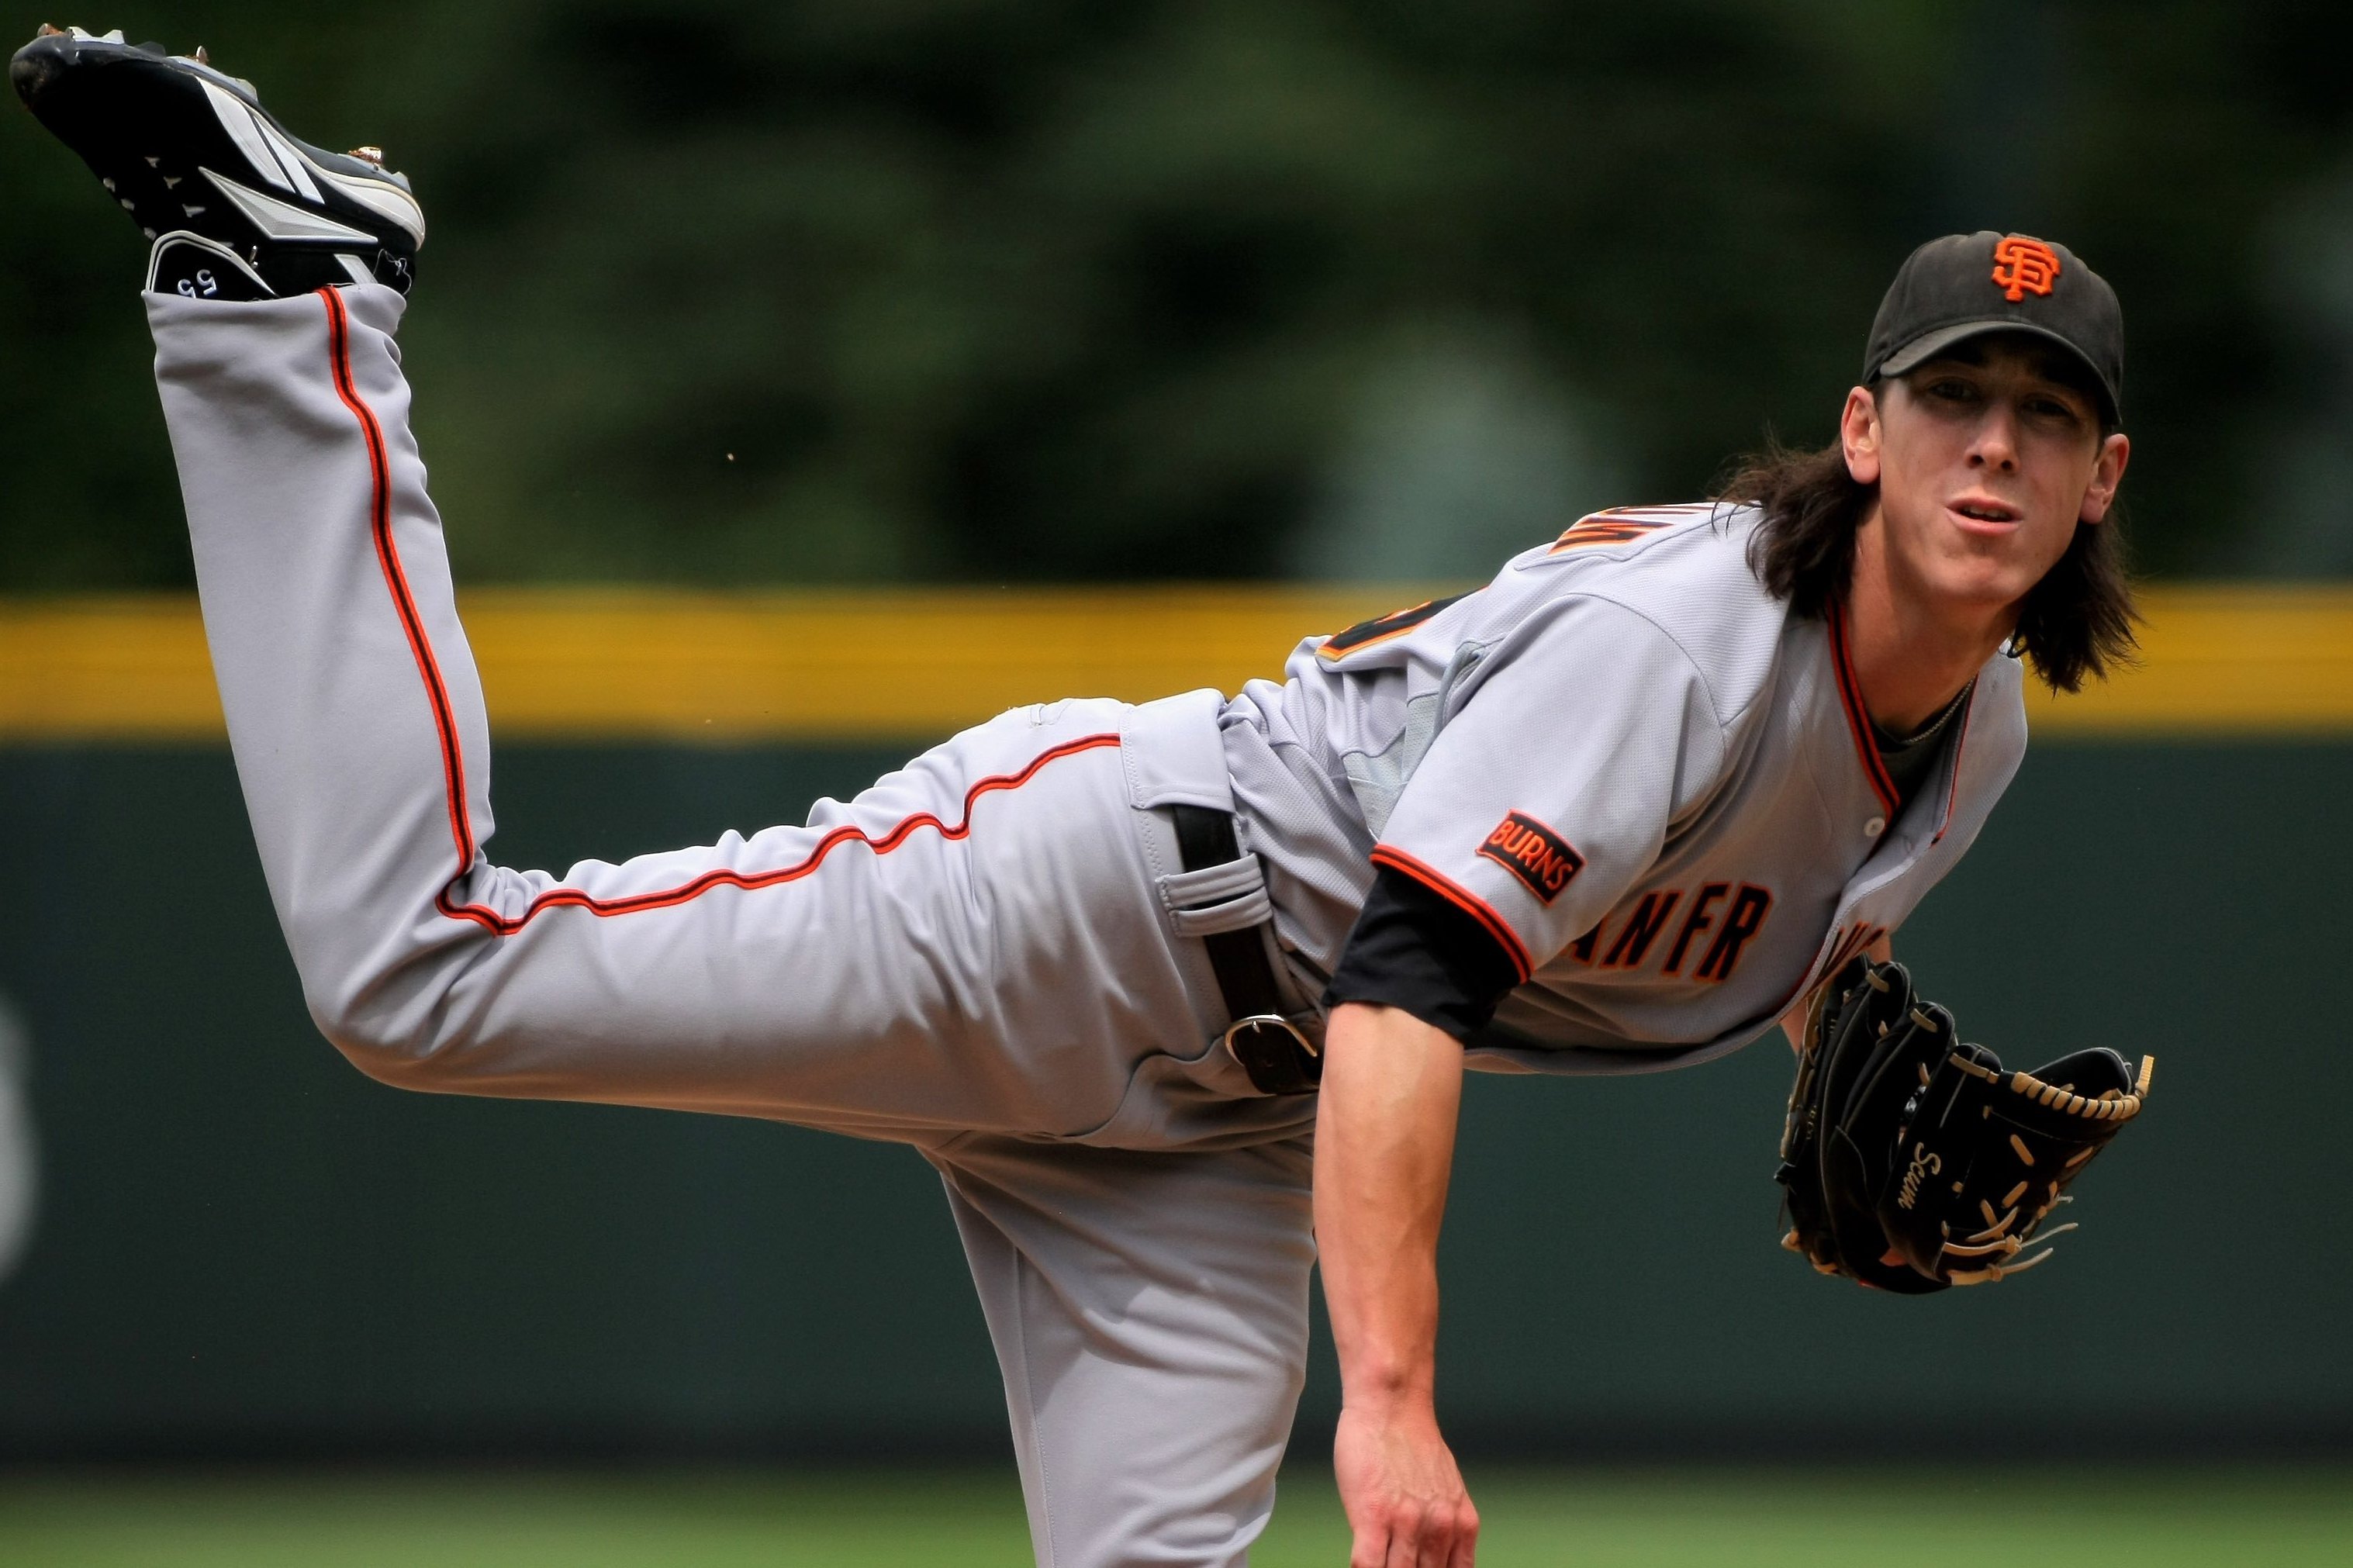 Have the San Francisco Giants been “clutch” to start the season